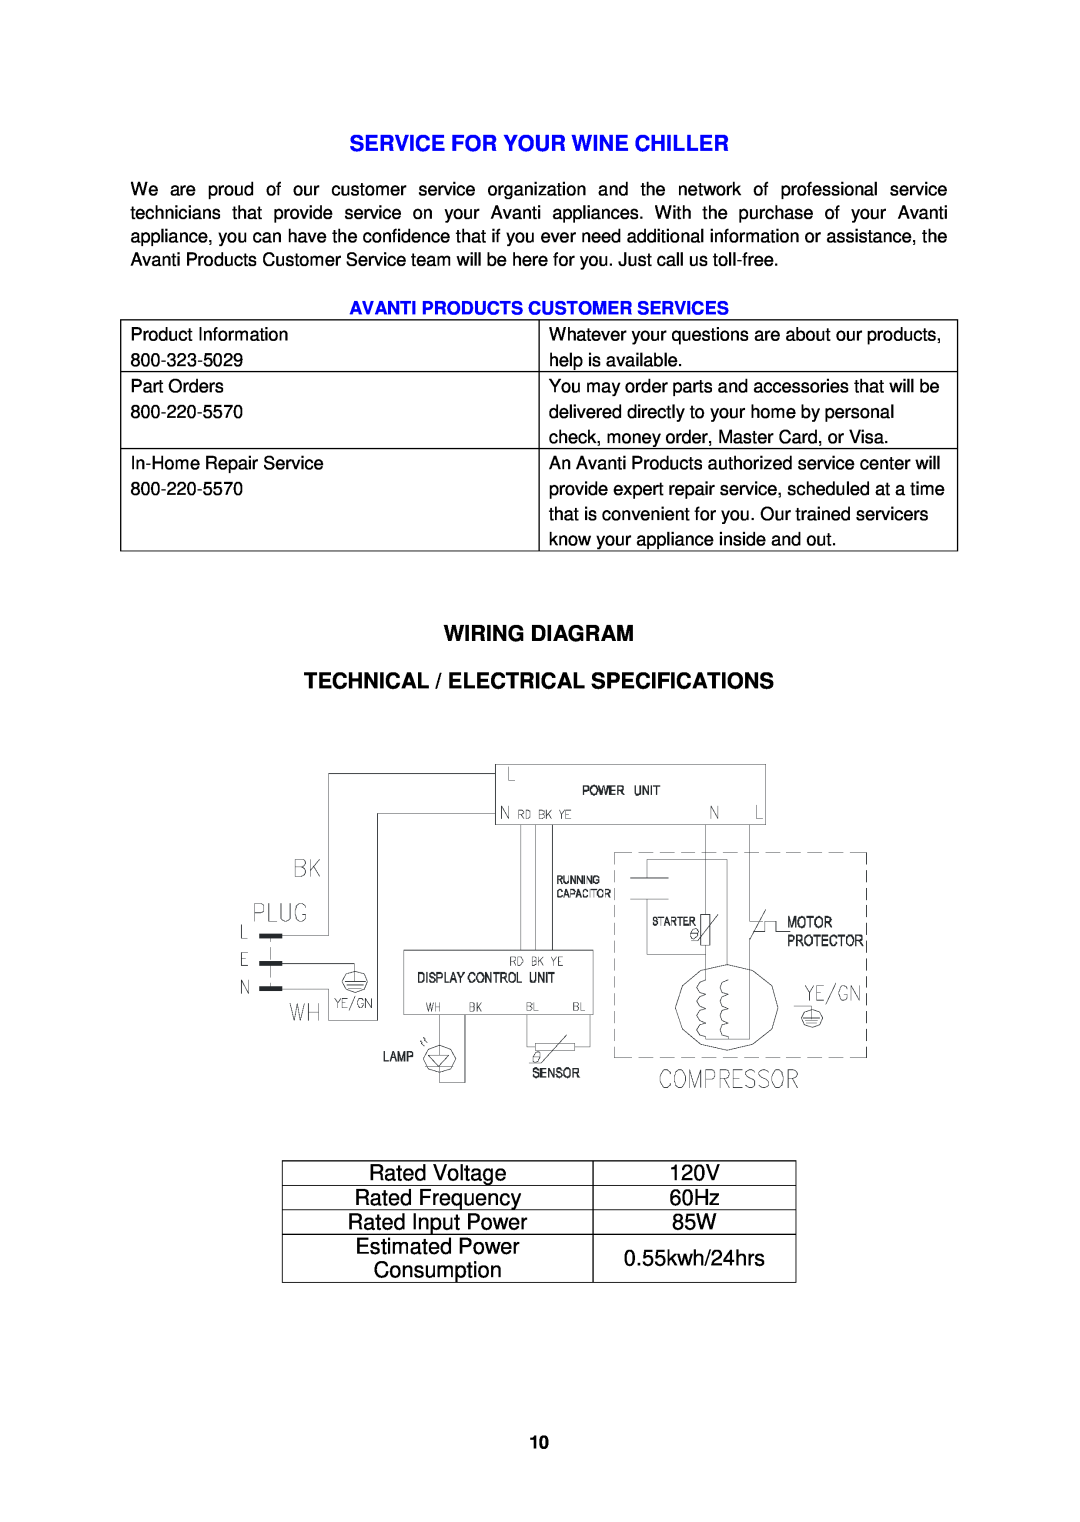 Avanti WC34TM Service For Your Wine Chiller, Wiring Diagram, Technical / Electrical Specifications, Rated Voltage, 120V 